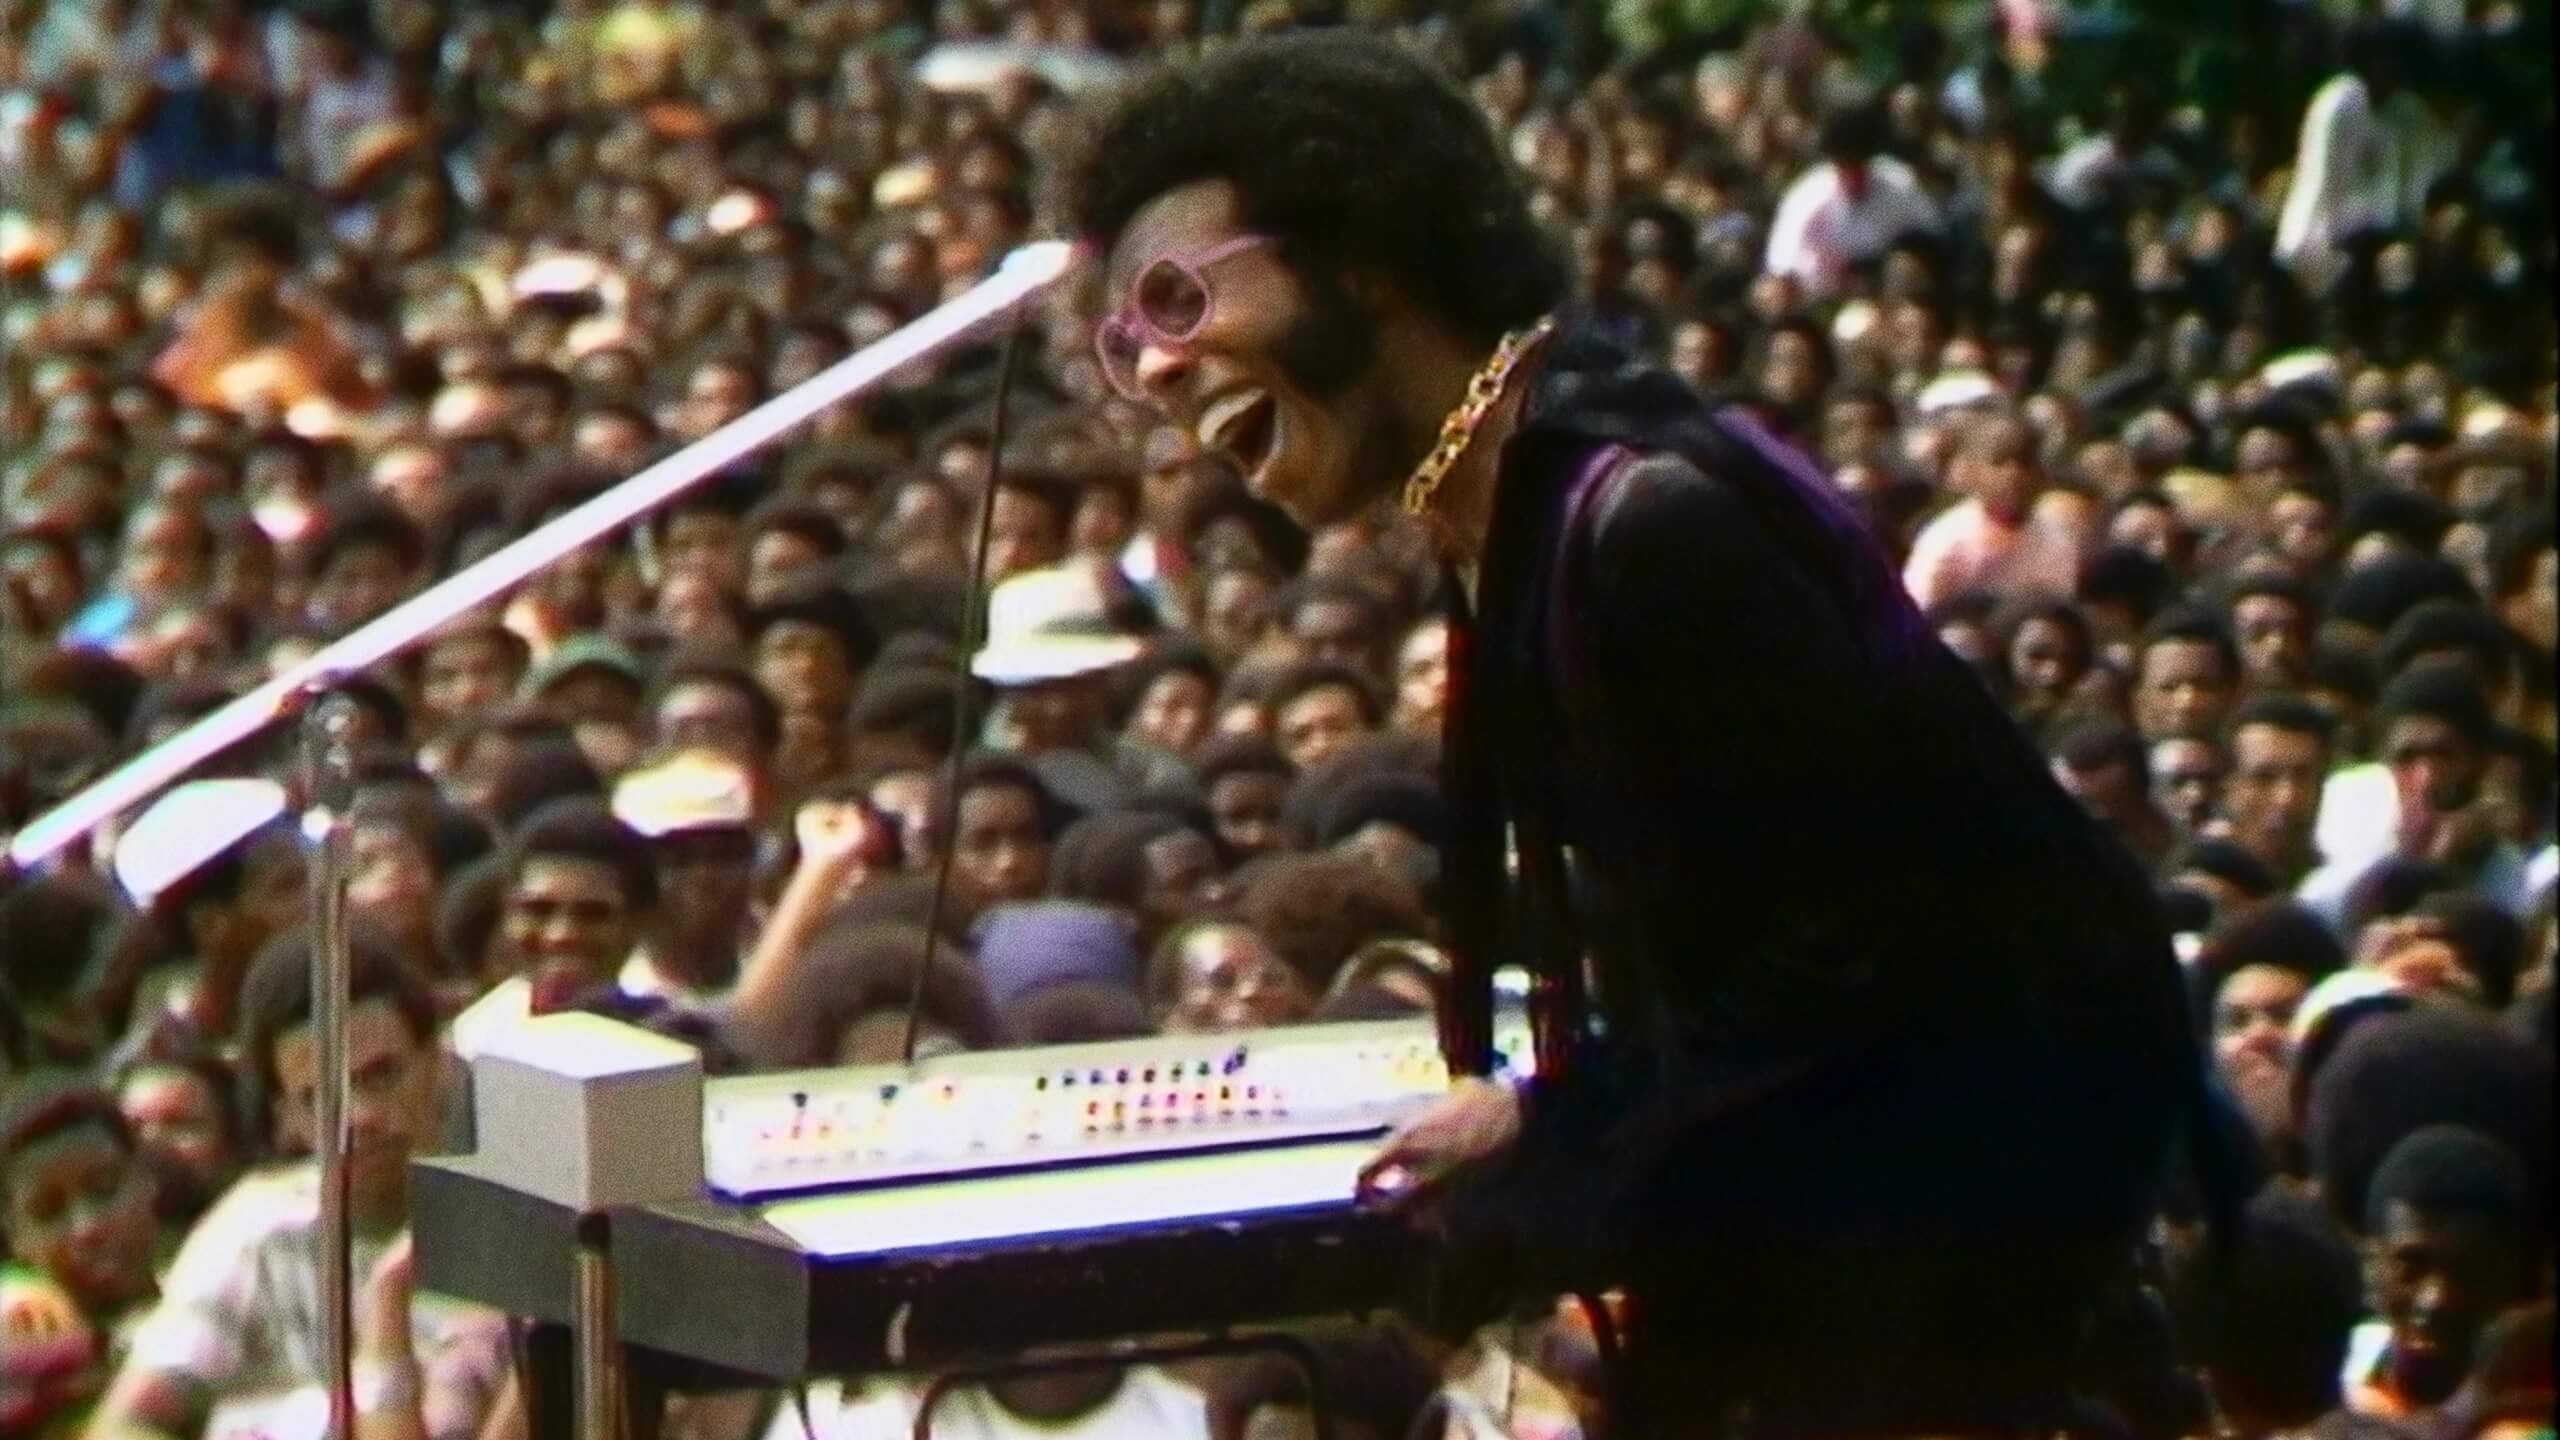 Image is archive photo of Sly and The Family Stone on stage, with concert crowd in background